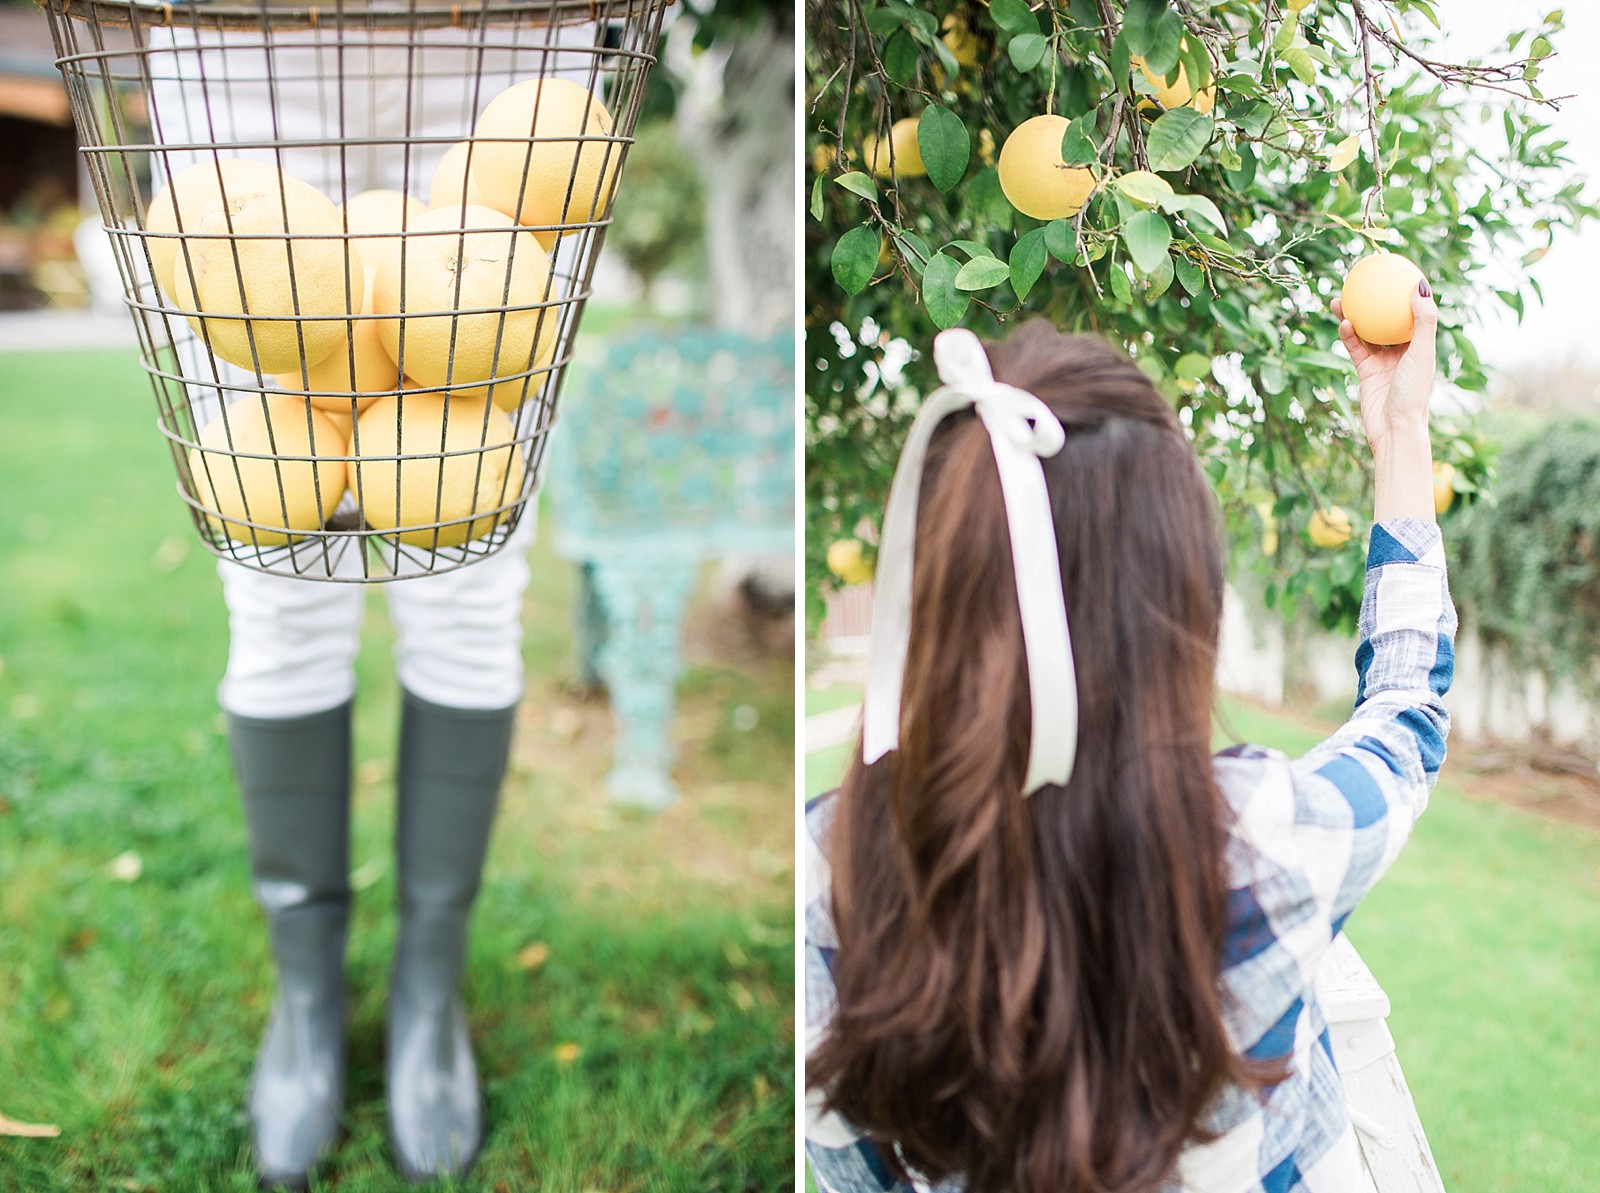 cloth and stone gingham button-back top anthropologie grapefruit picking fashion blogger phoenix lifestyle blogger hunter wedges wedge boots